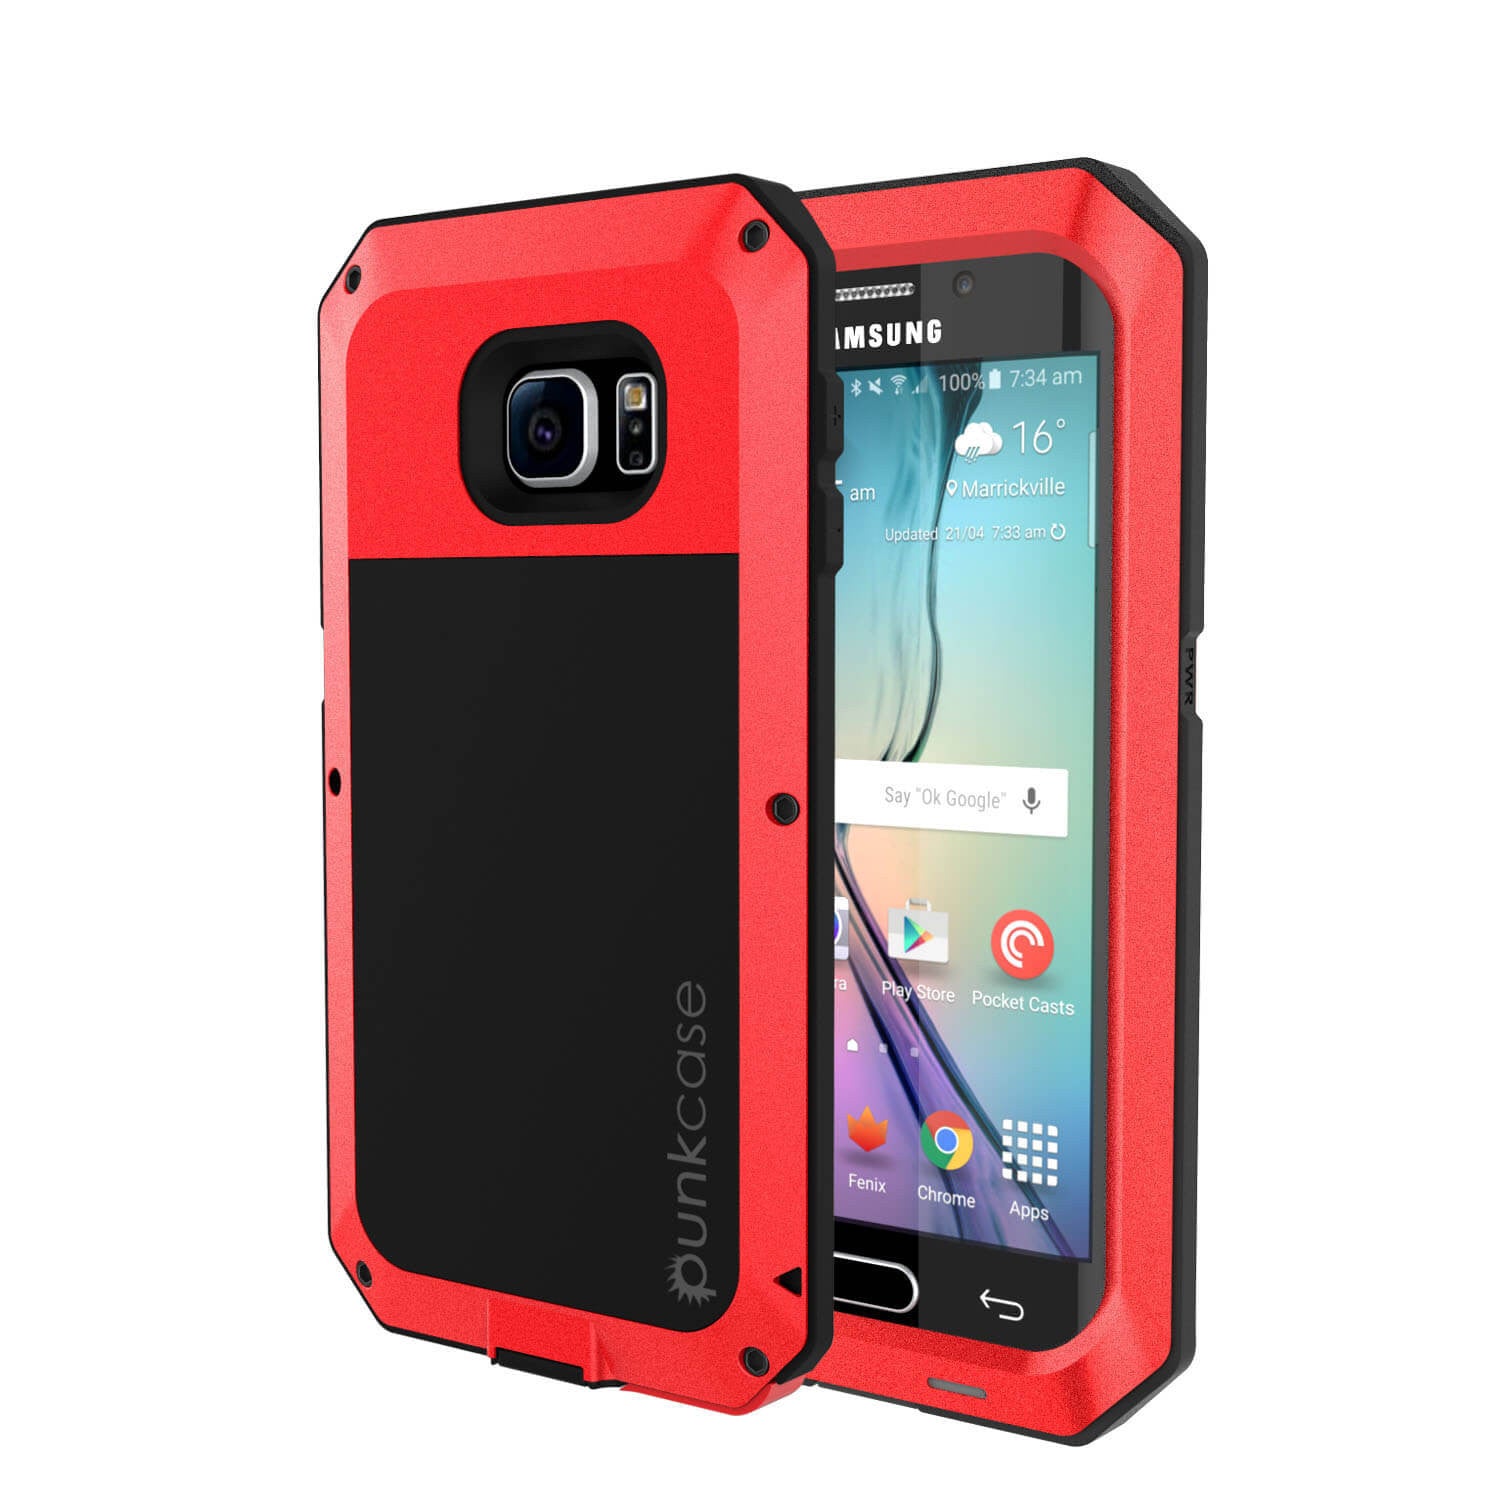 Galaxy S6 EDGE+ Plus  Case, PUNKcase Metallic Red Shockproof  Slim Metal Armor Case (Color in image: red)